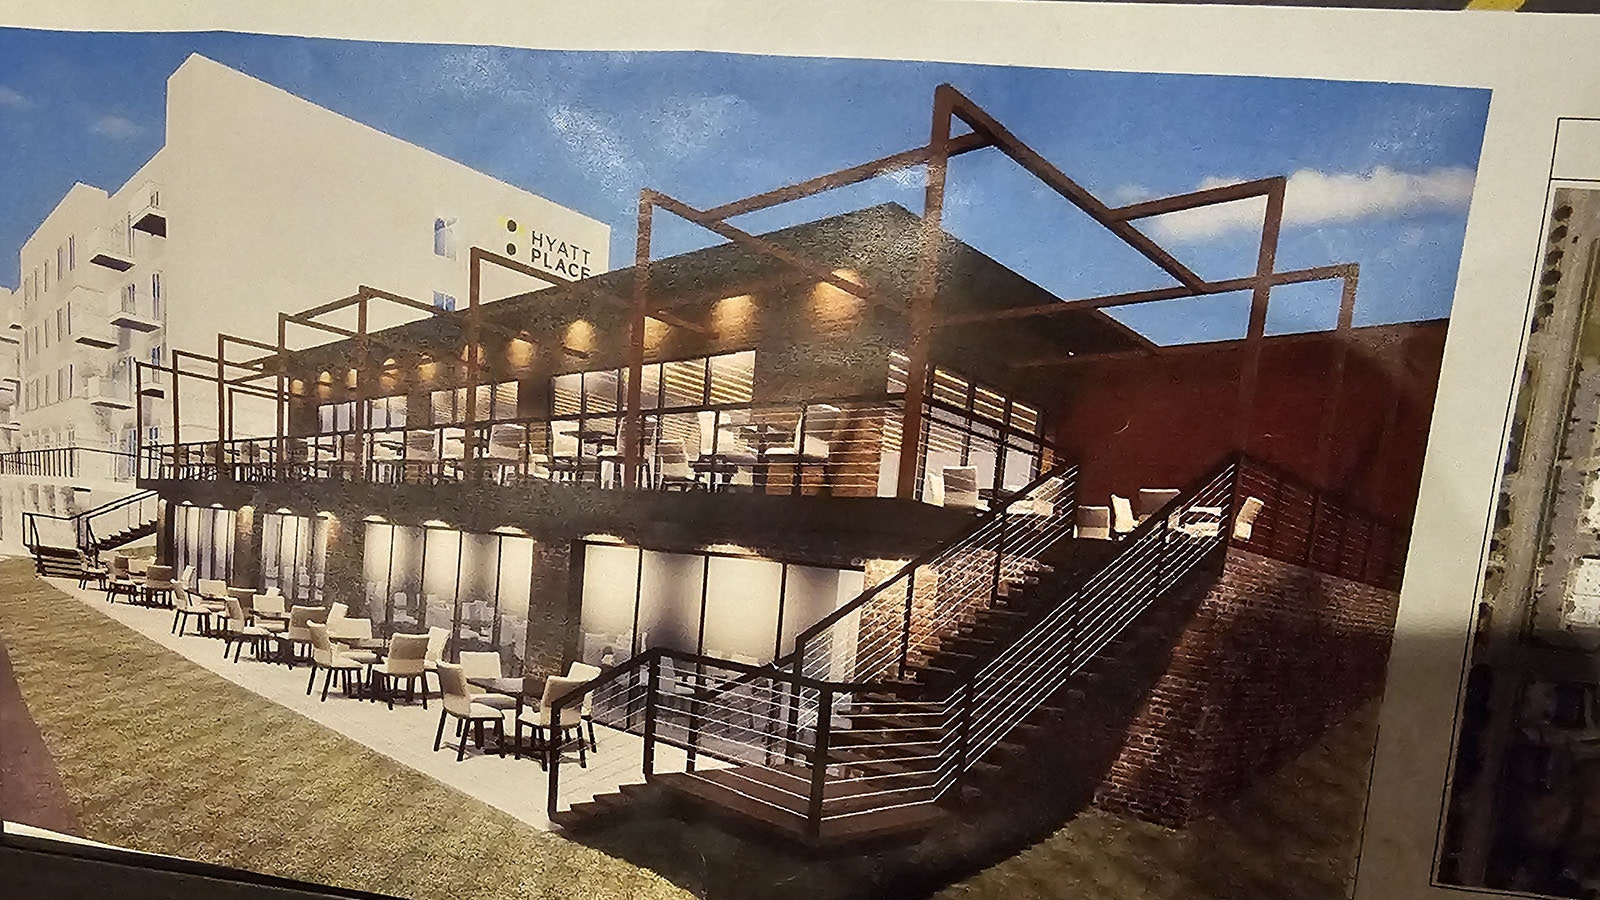 An architect's rendering of the Big Lost Meadery that's soon to open in Sioux Falls, South Dakota.